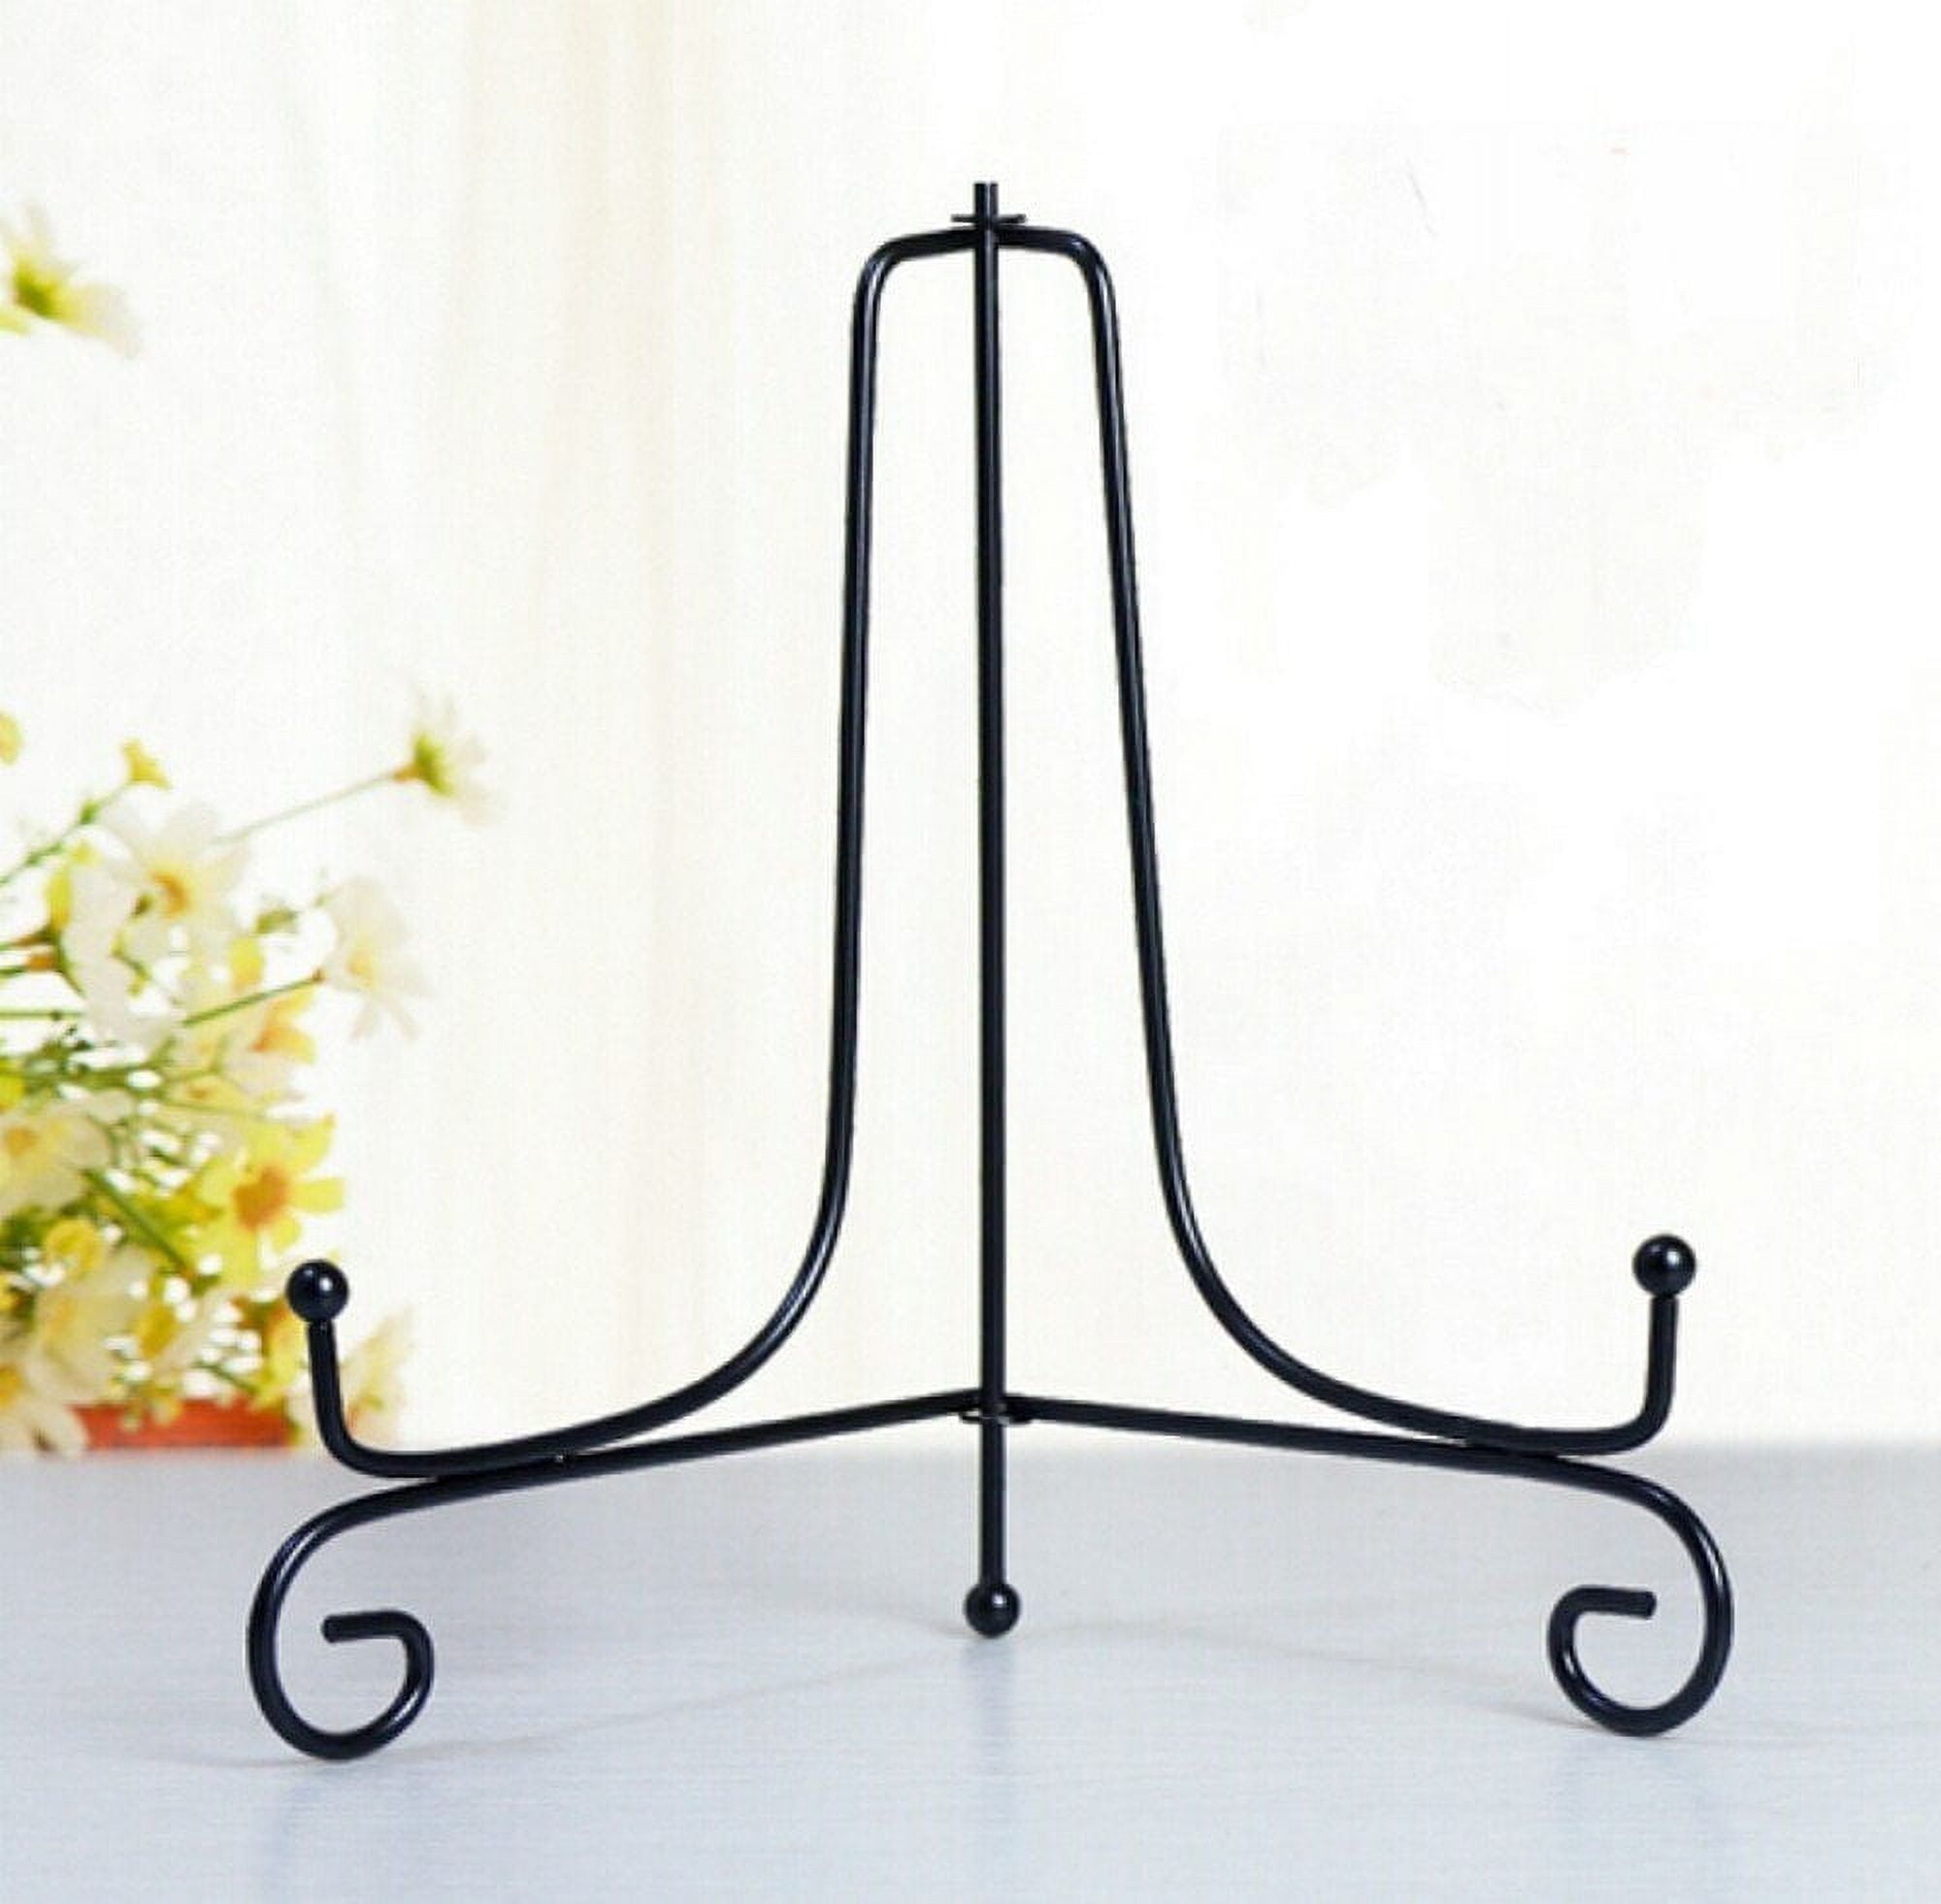 Zeckos Wrought Iron Display Picture Easel Decorative Holder 50